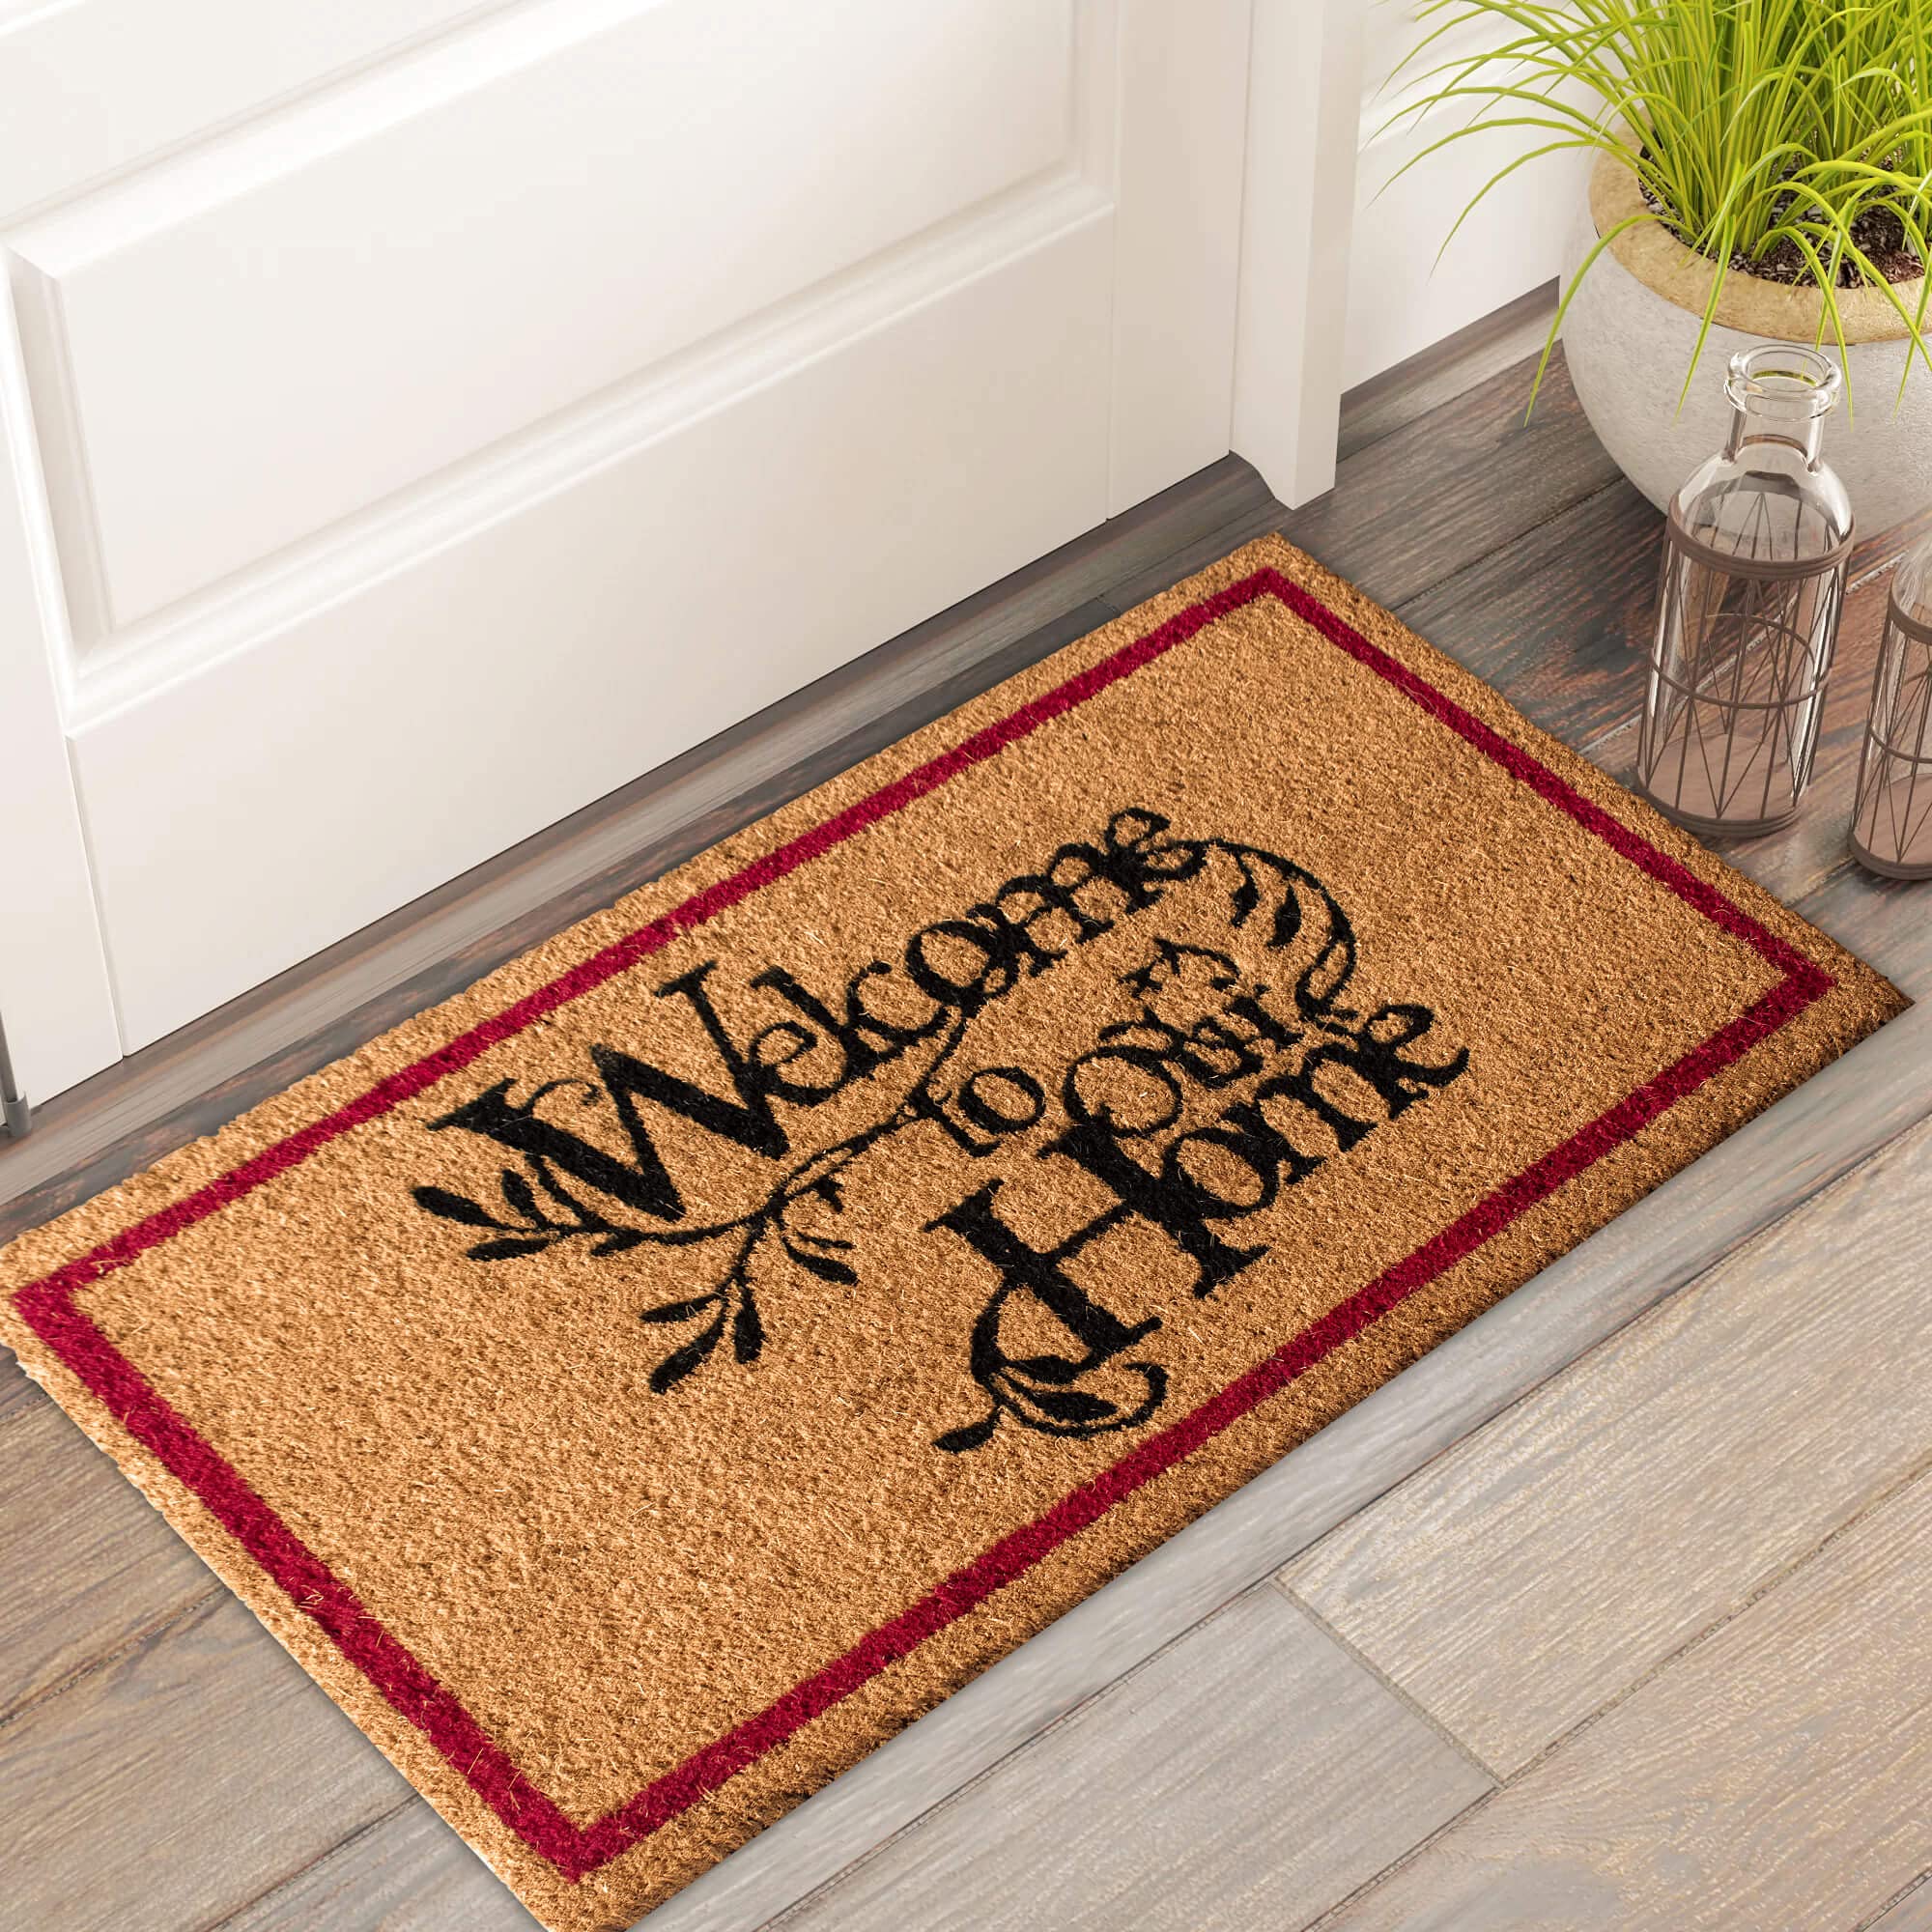 LuxUrux Welcome Mats Outdoor Coco Coir Doormat, with Heavy-Duty PVC Backing - Natural - Perfect Color/Sizing for Outdoor uses.  - Acceptable